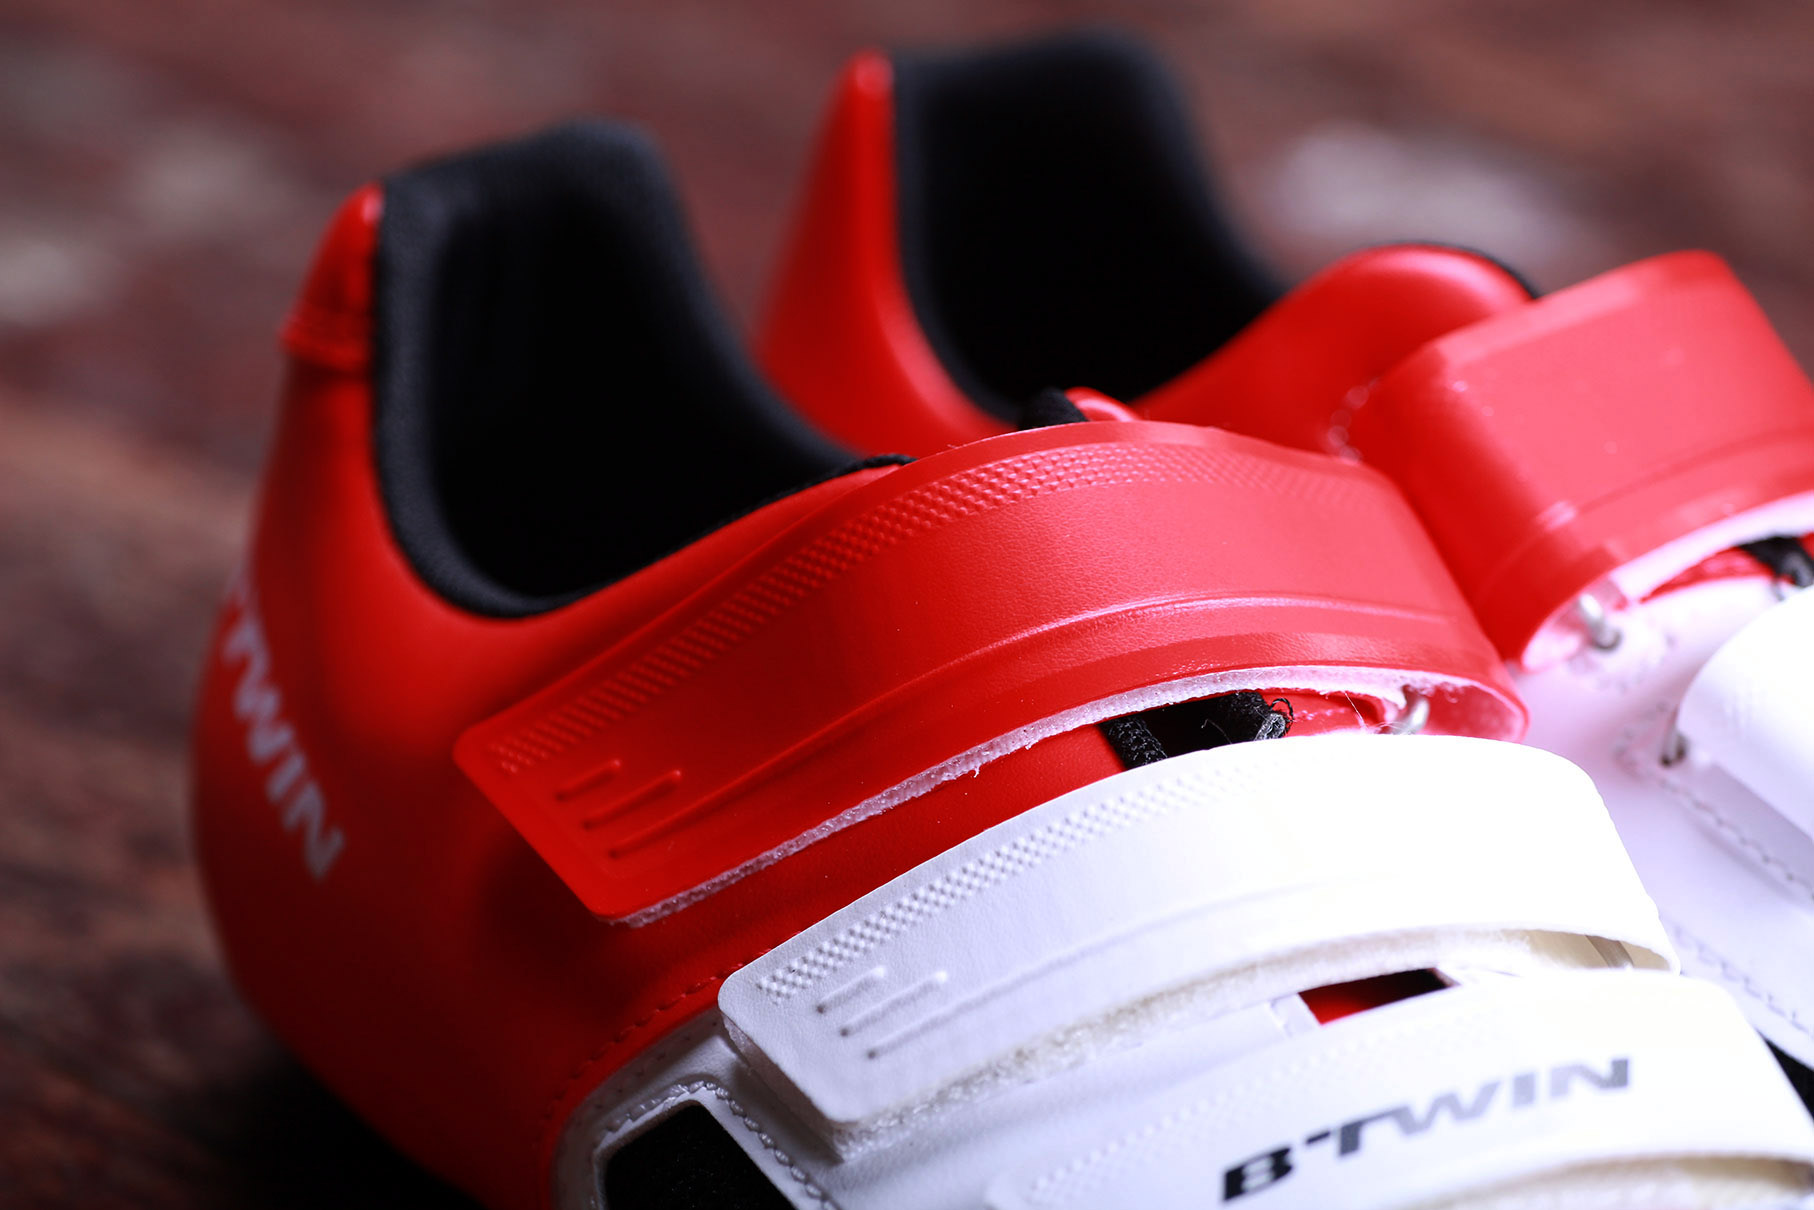 btwin cleat shoes